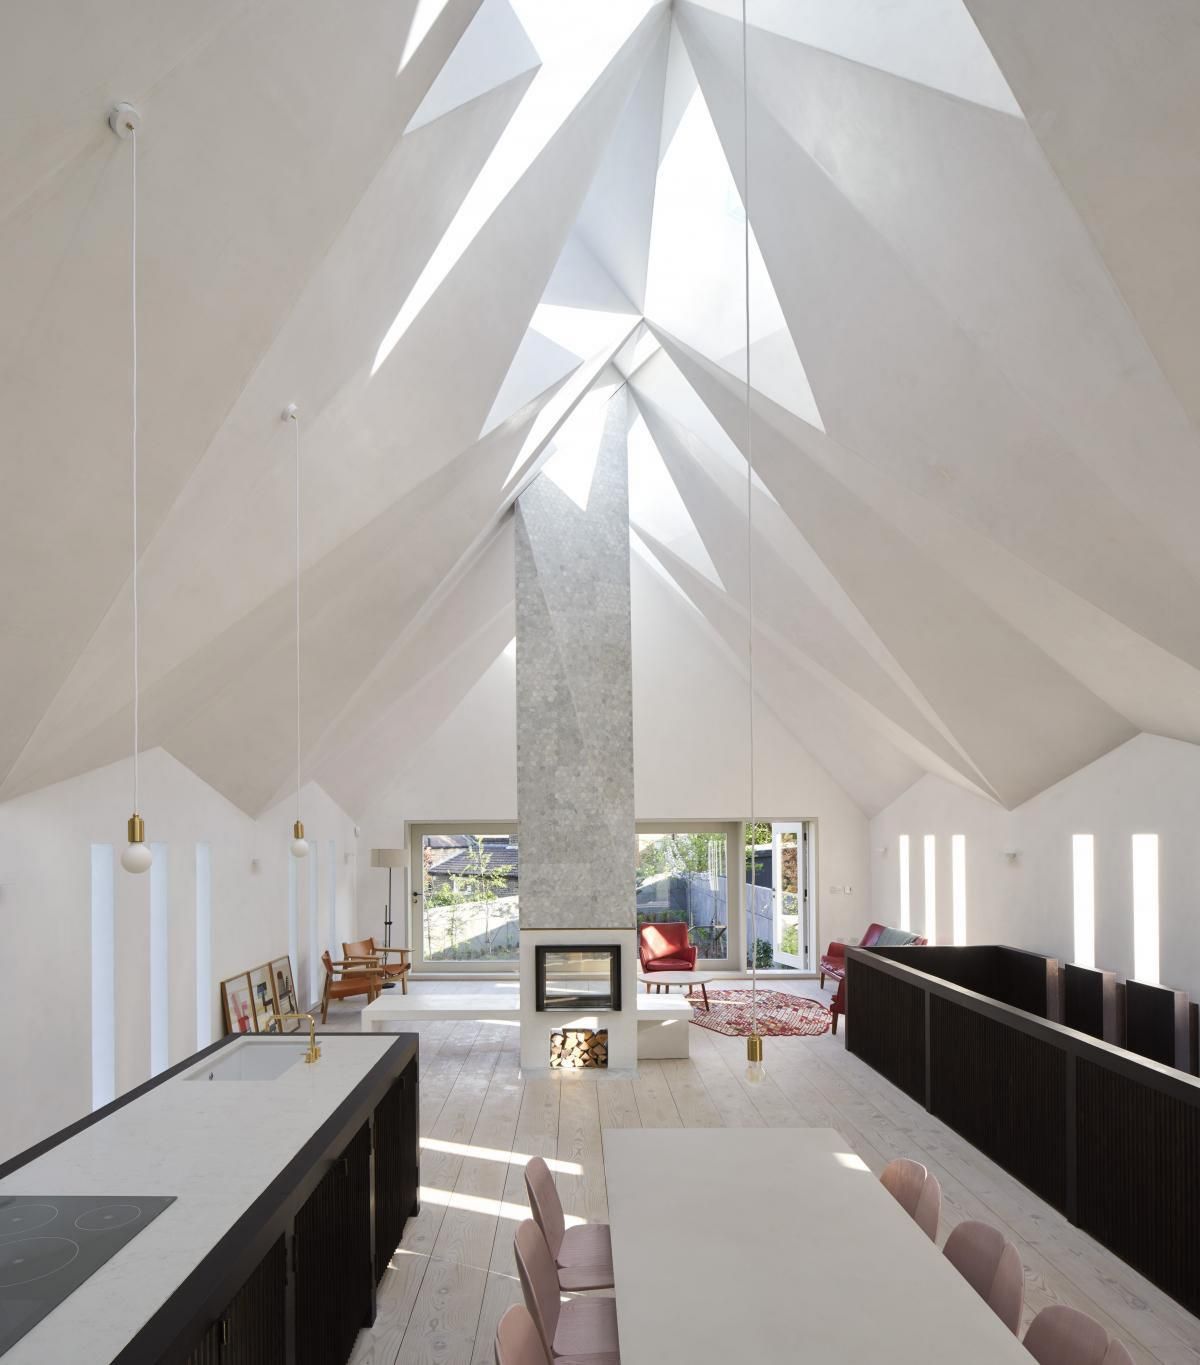 Architect John Smart transforms old chapel into modern home in London